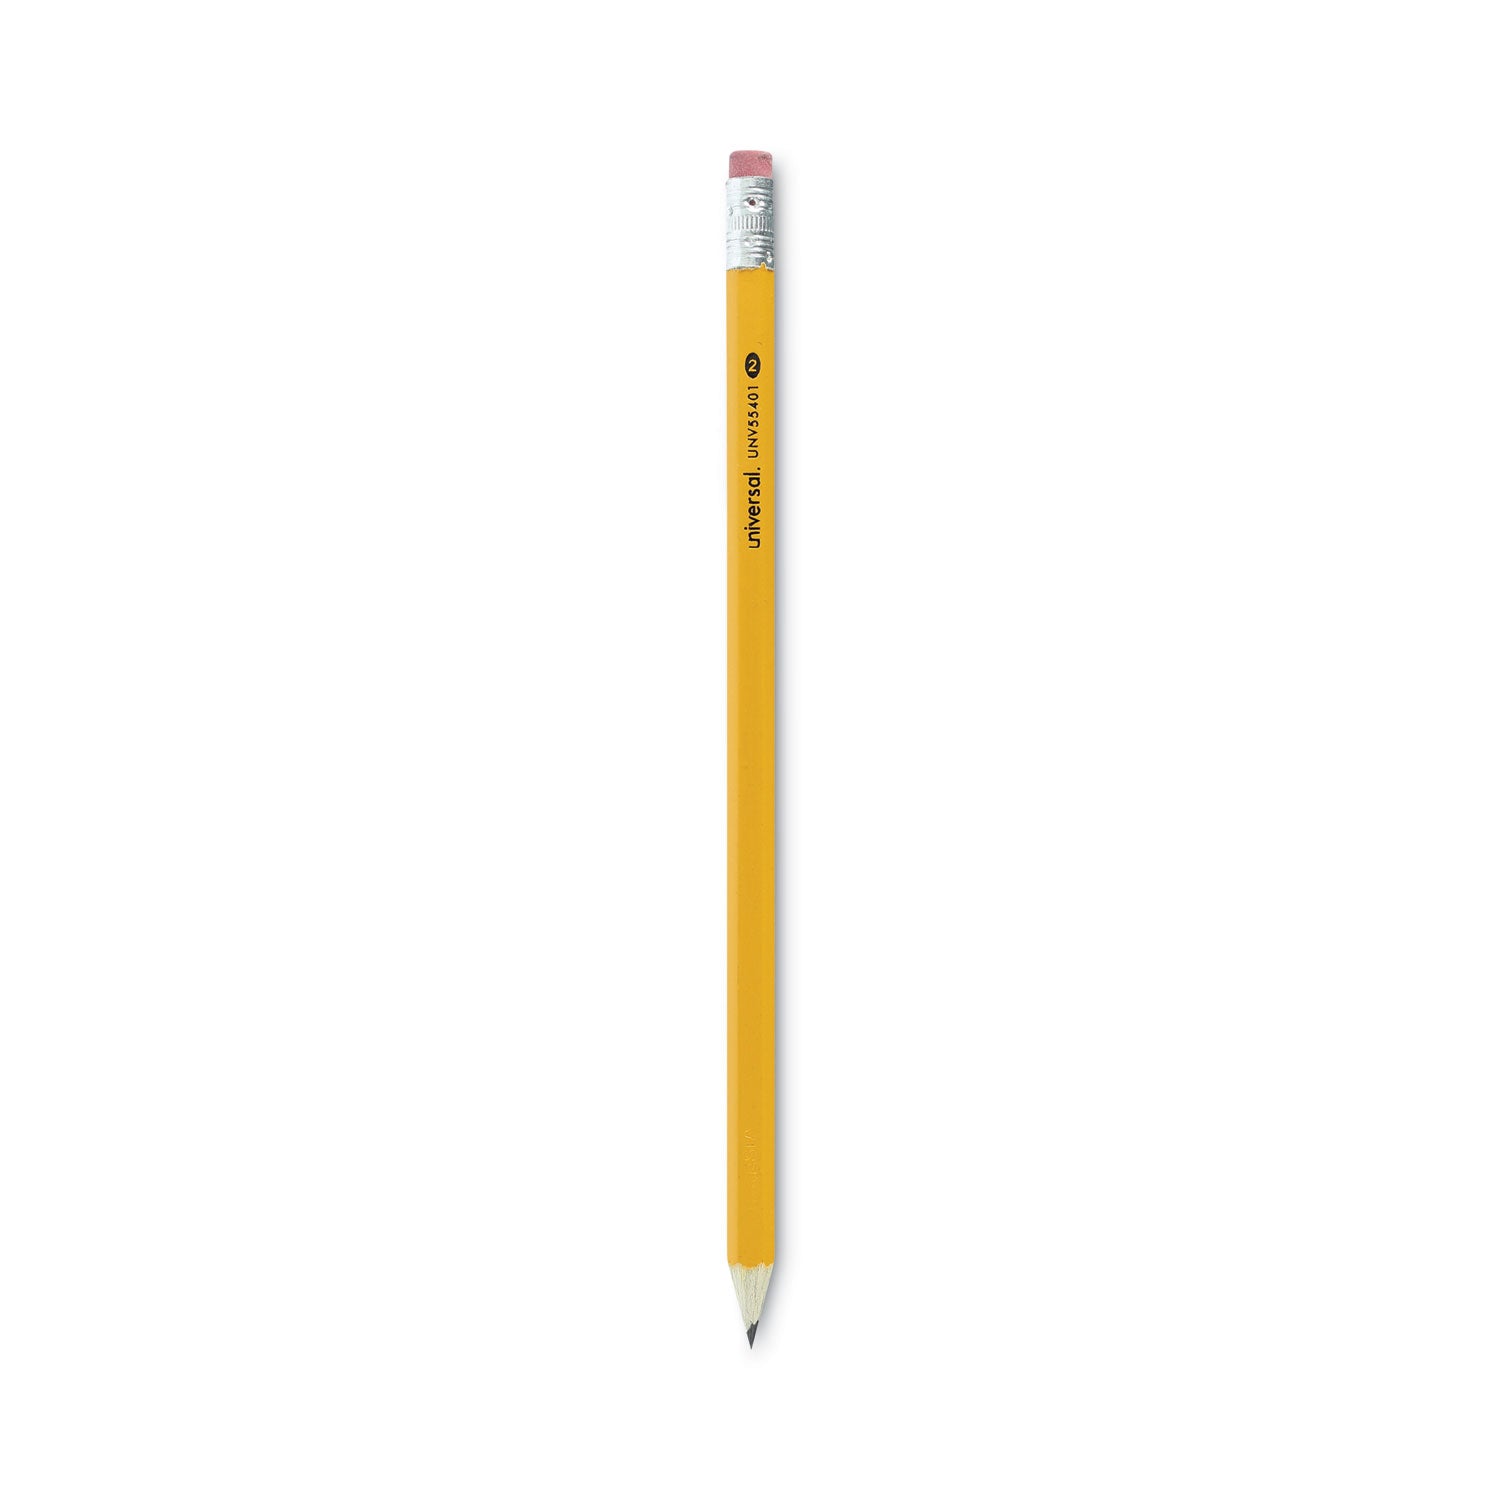 #2-pre-sharpened-woodcase-pencil-hb-#2-black-lead-yellow-barrel-24-pack_unv55401 - 1